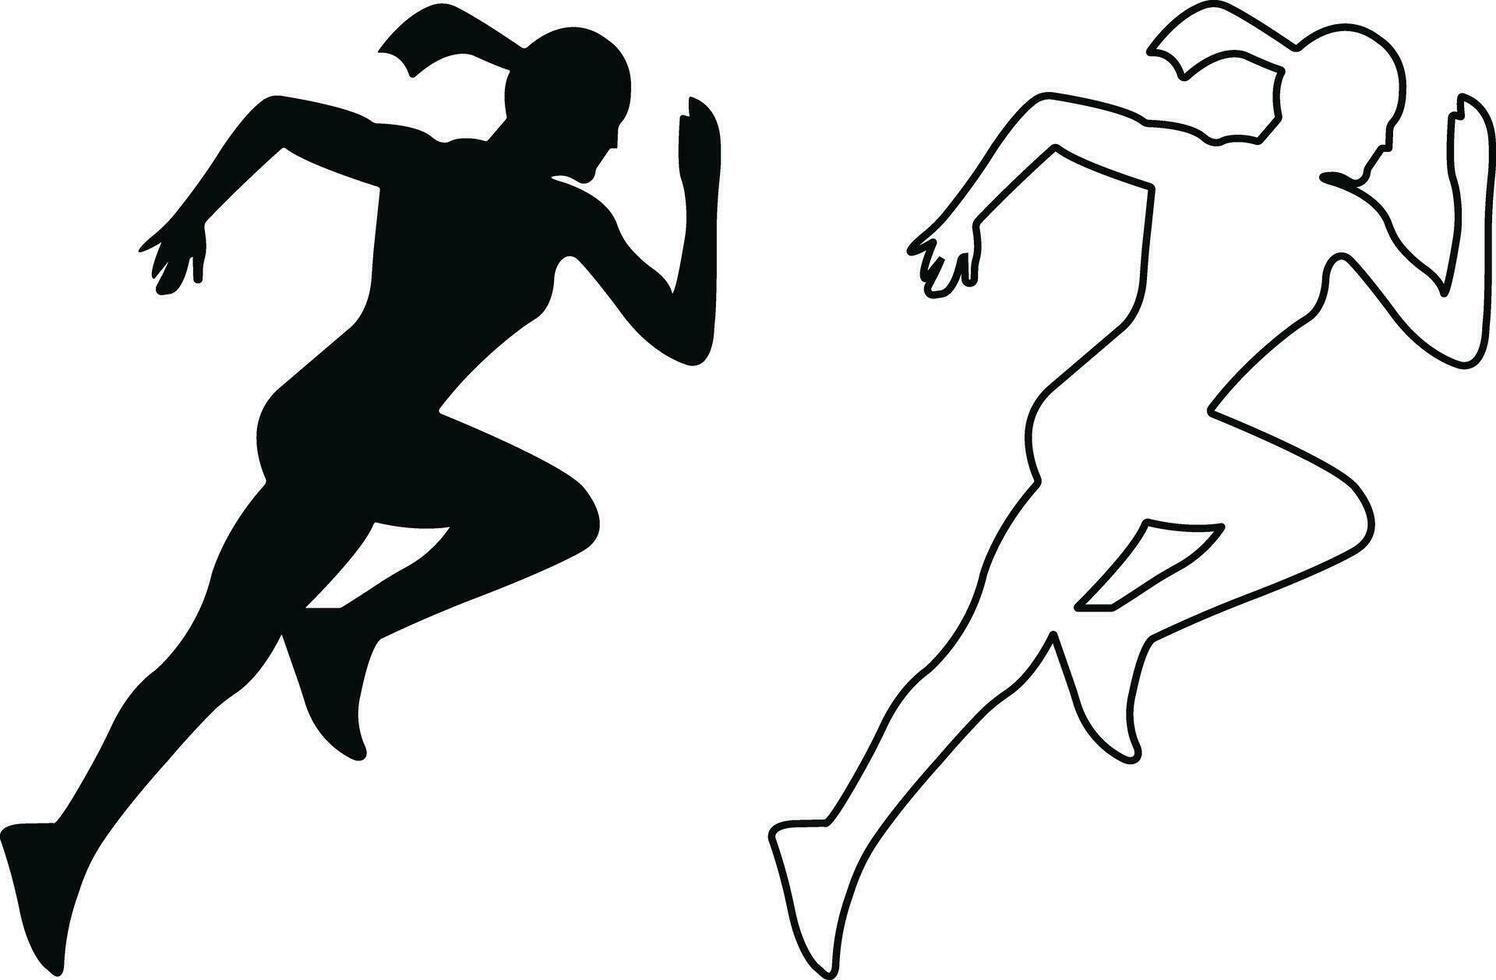 Running sport women icon in flat, line set. isolated on  Containing runner, race, finish, boy stick figure running fast and jogging elements. symbol Vector for apps and website